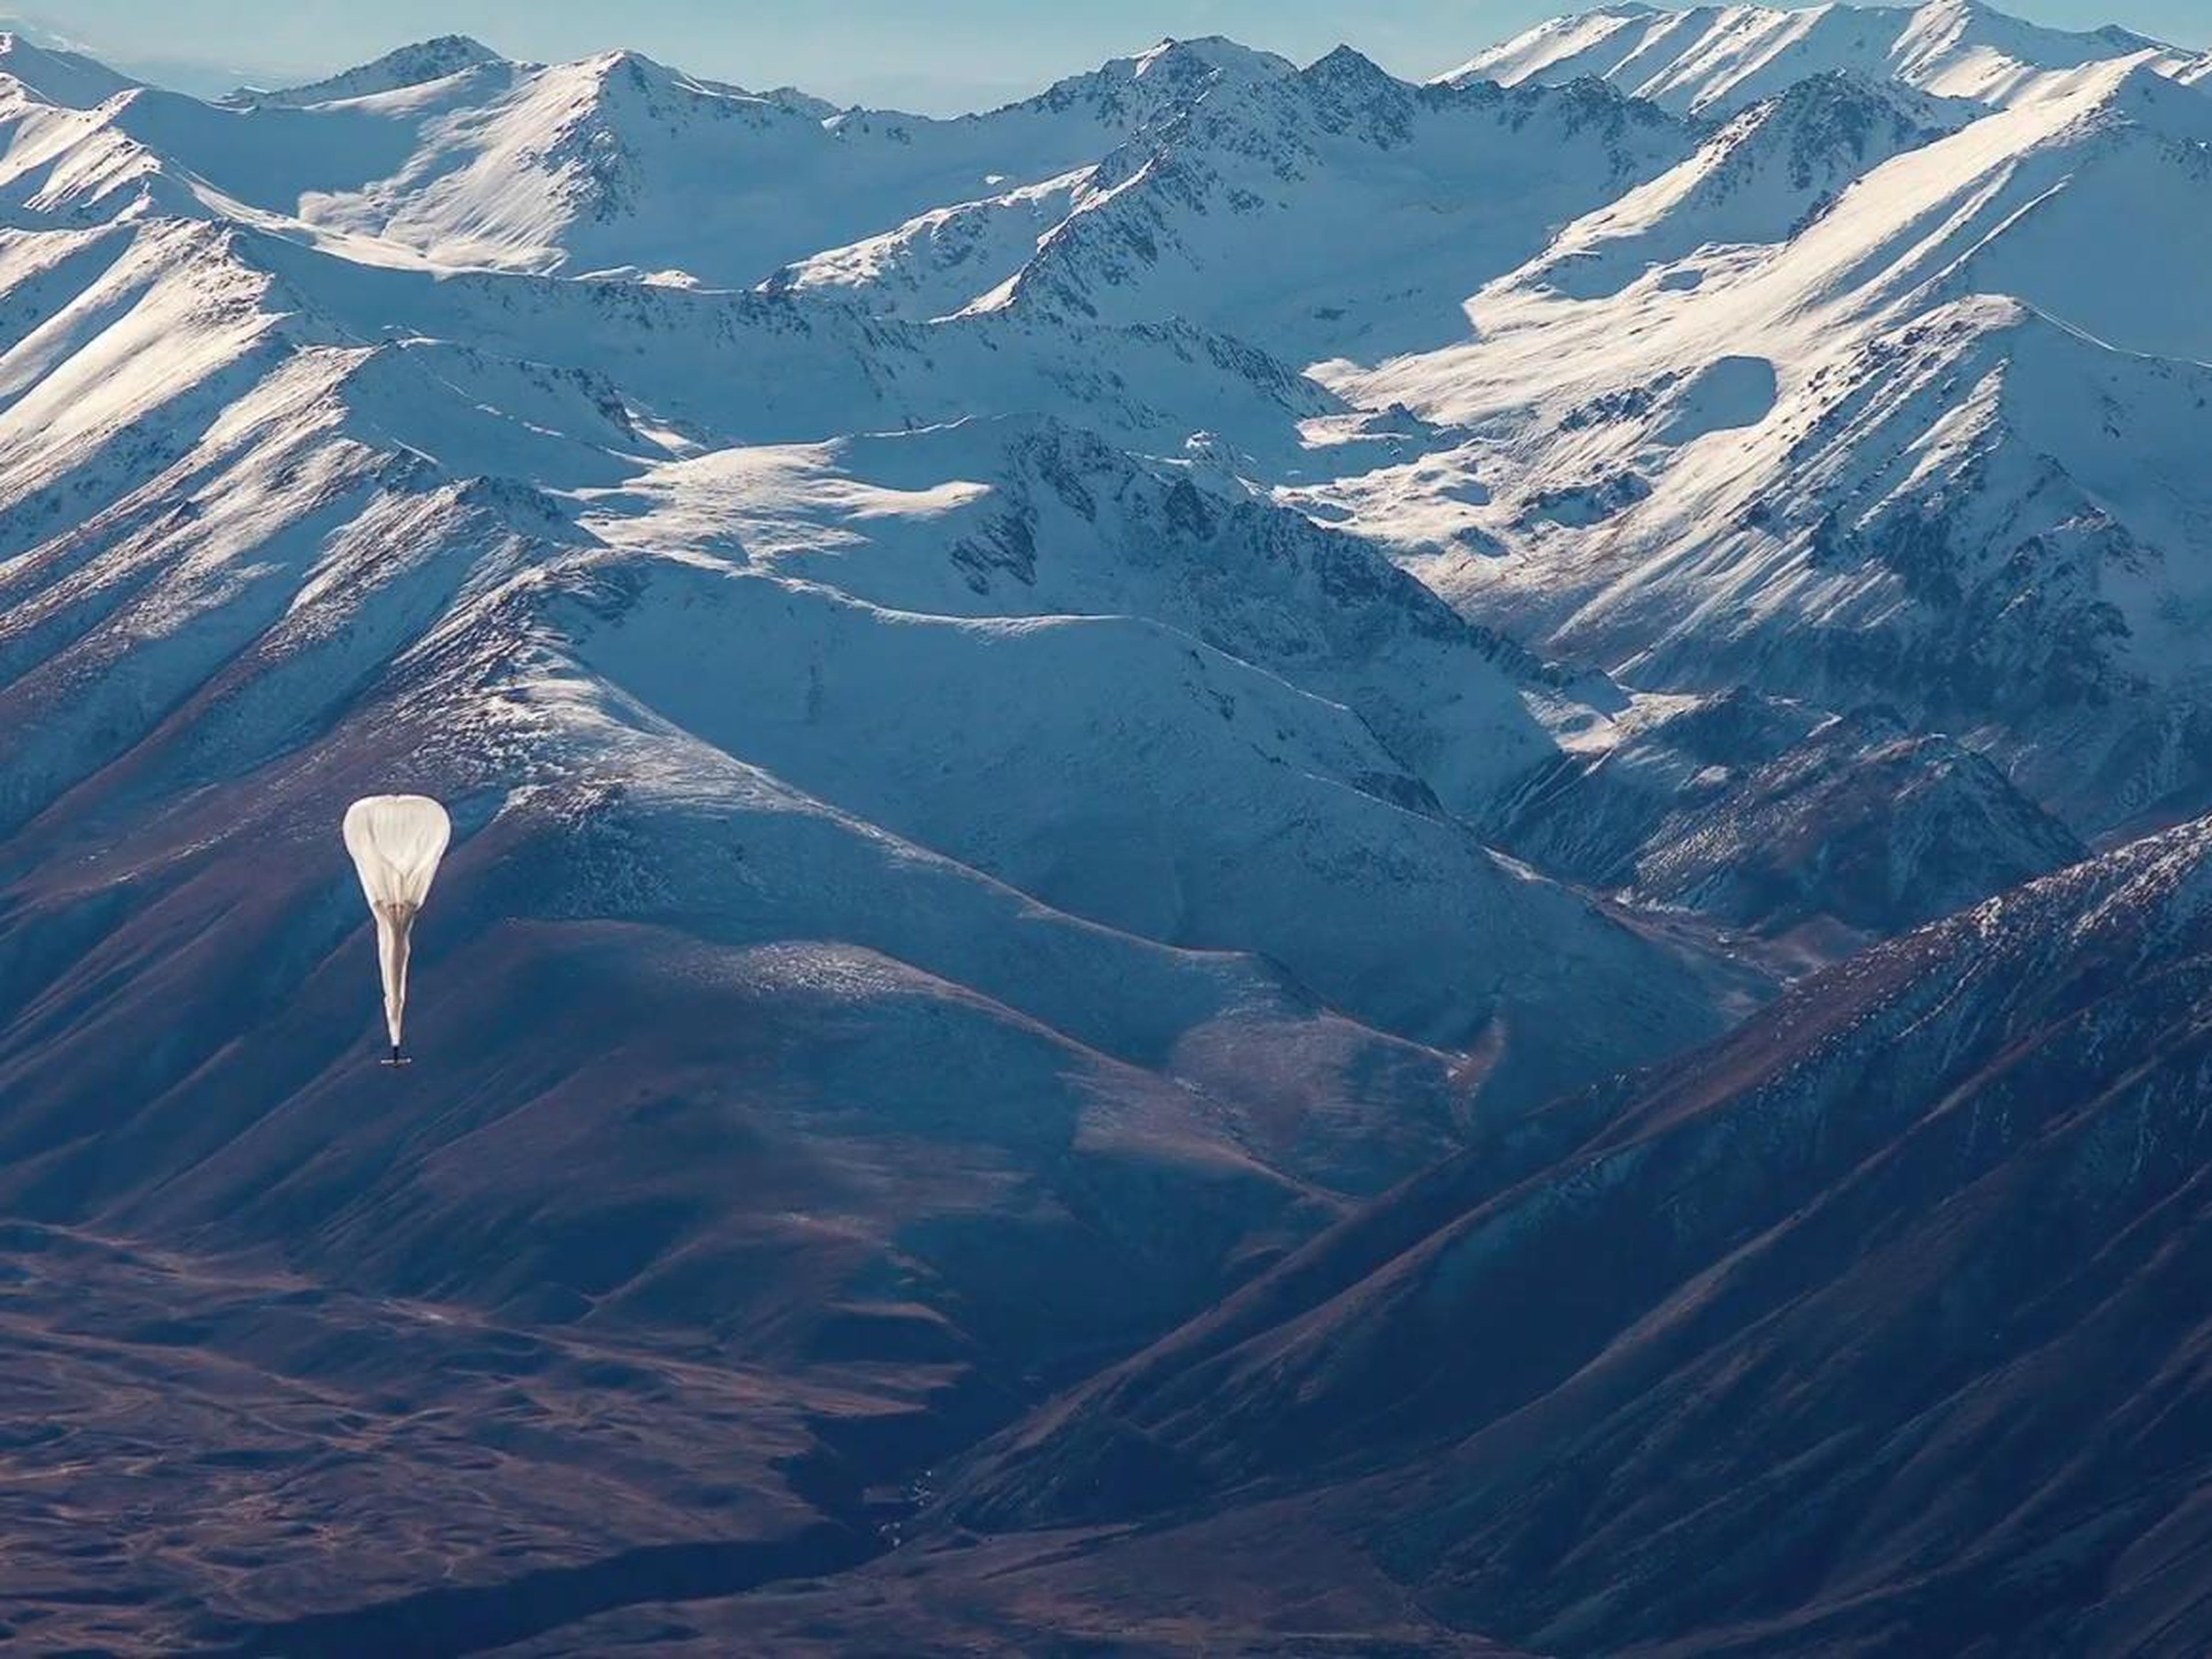 Project Loon, a former X "moonshot" that is now is an independent business, has a mission to bring web access to two-thirds of the world's population using internet-beaming hot air balloons.